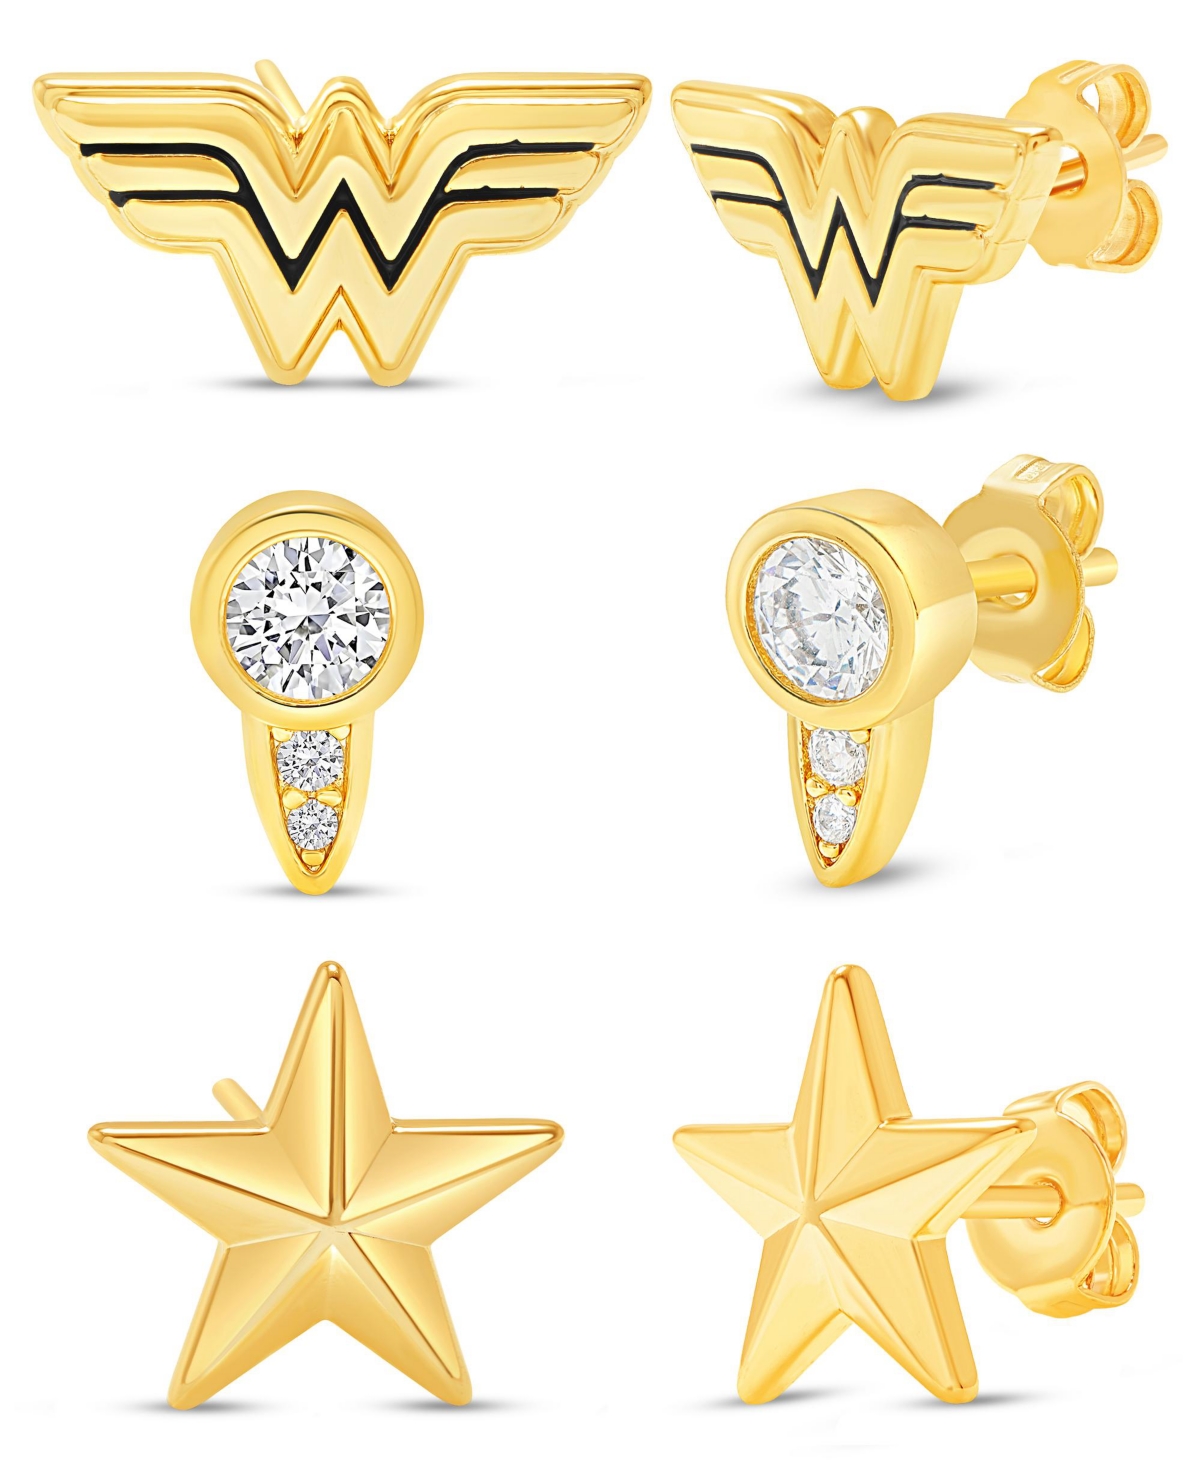 Wonder Woman Gold Plated Stud Earrings Set - 3 Pairs - Gold tone